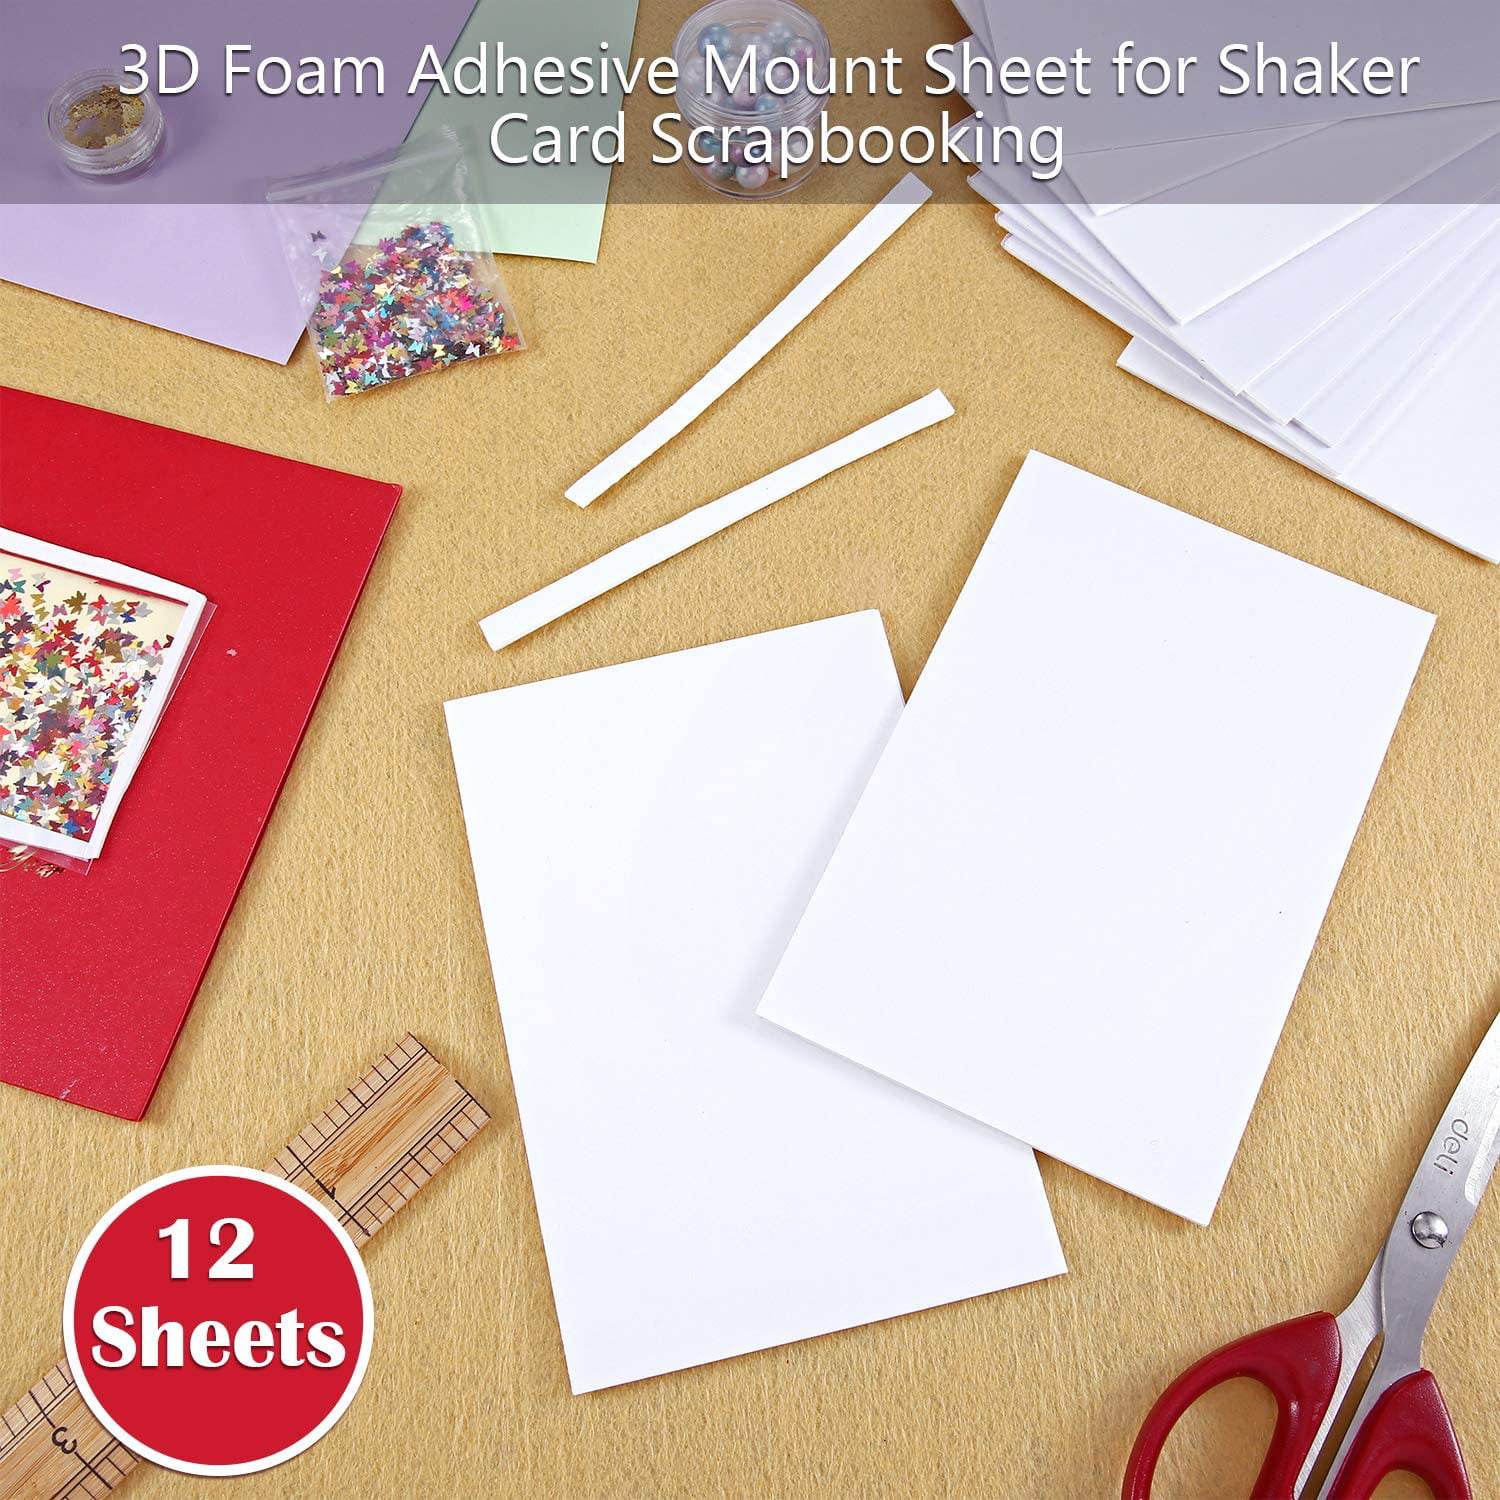 12 Sheets Sticky Foam Sheets Double Sided Adhesive Foam Sheets 3D White Dual-Adhesive Foam Sheets for Shaker Cards Scrapbooking Crafting 7.9 x 5.9 Inch 